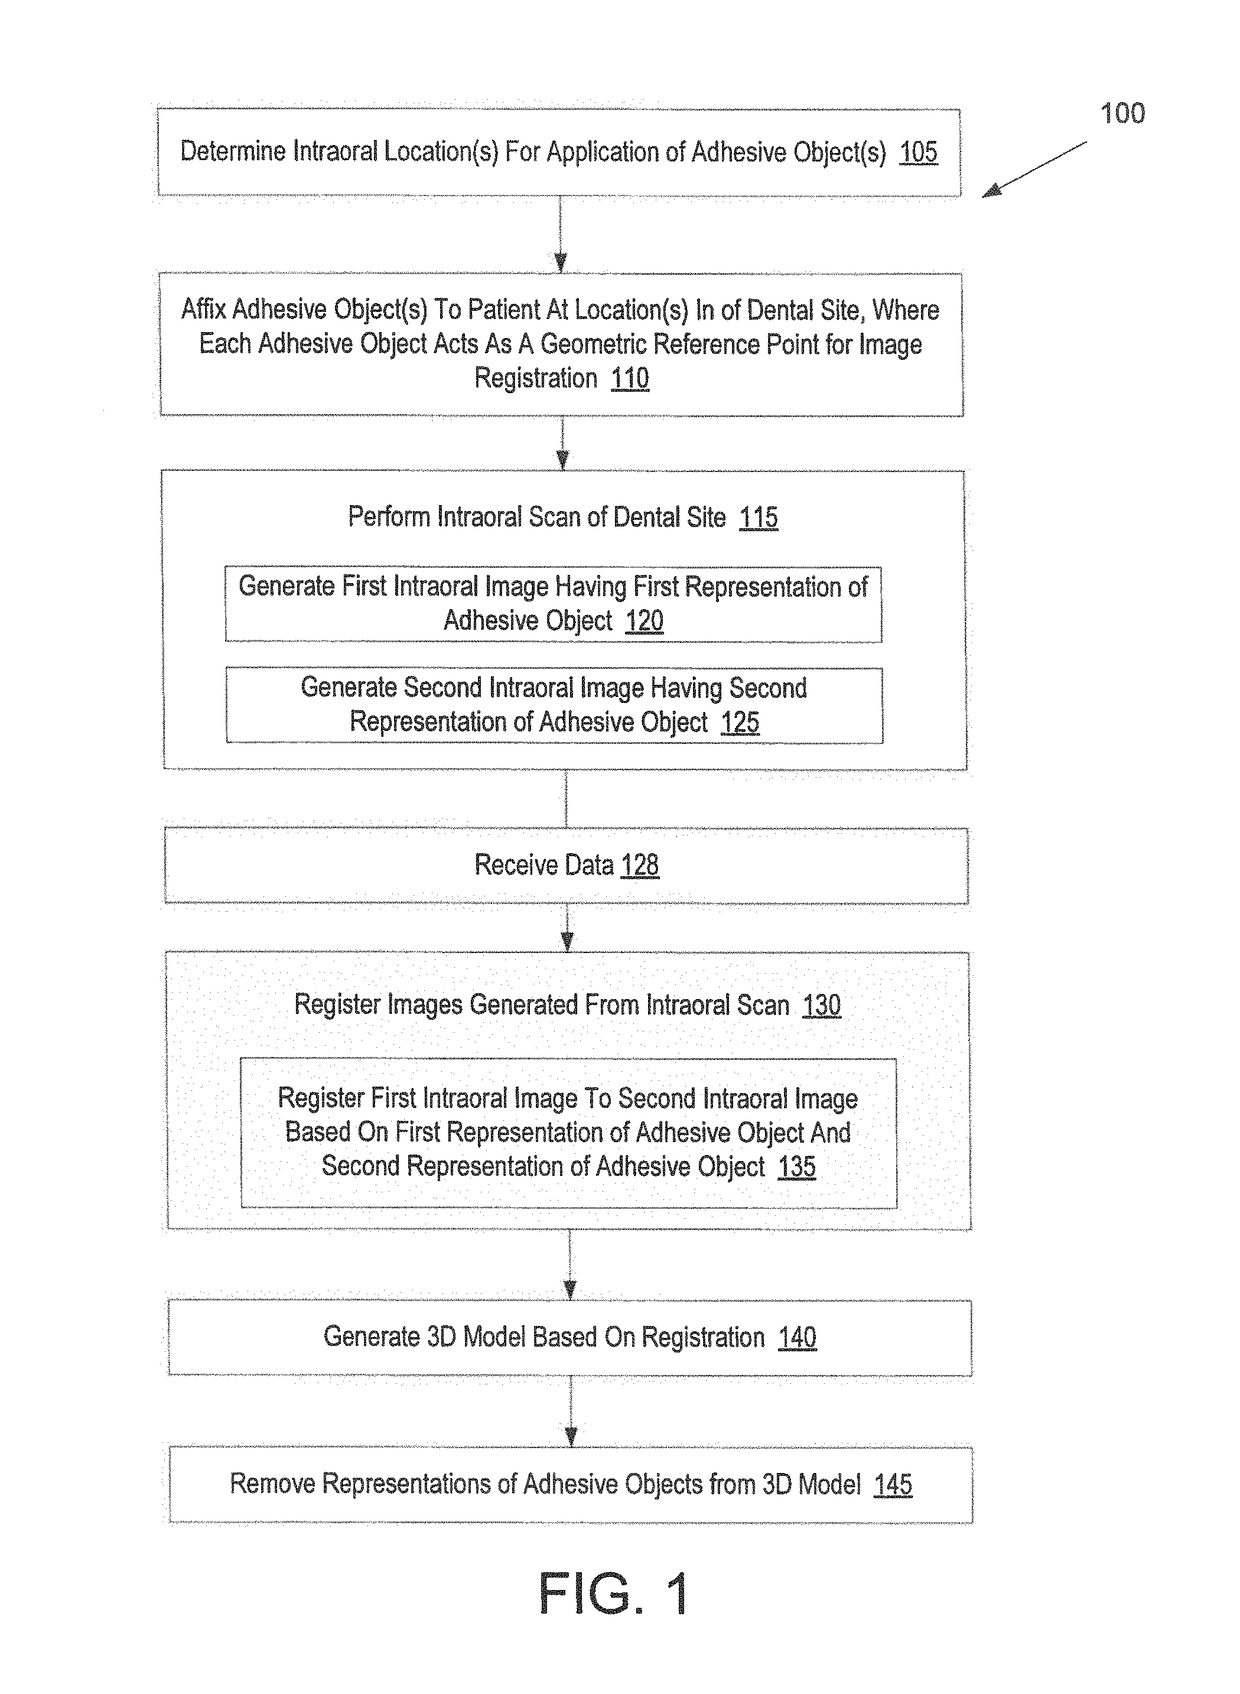 Adhesive objects for improving image registration of intraoral images